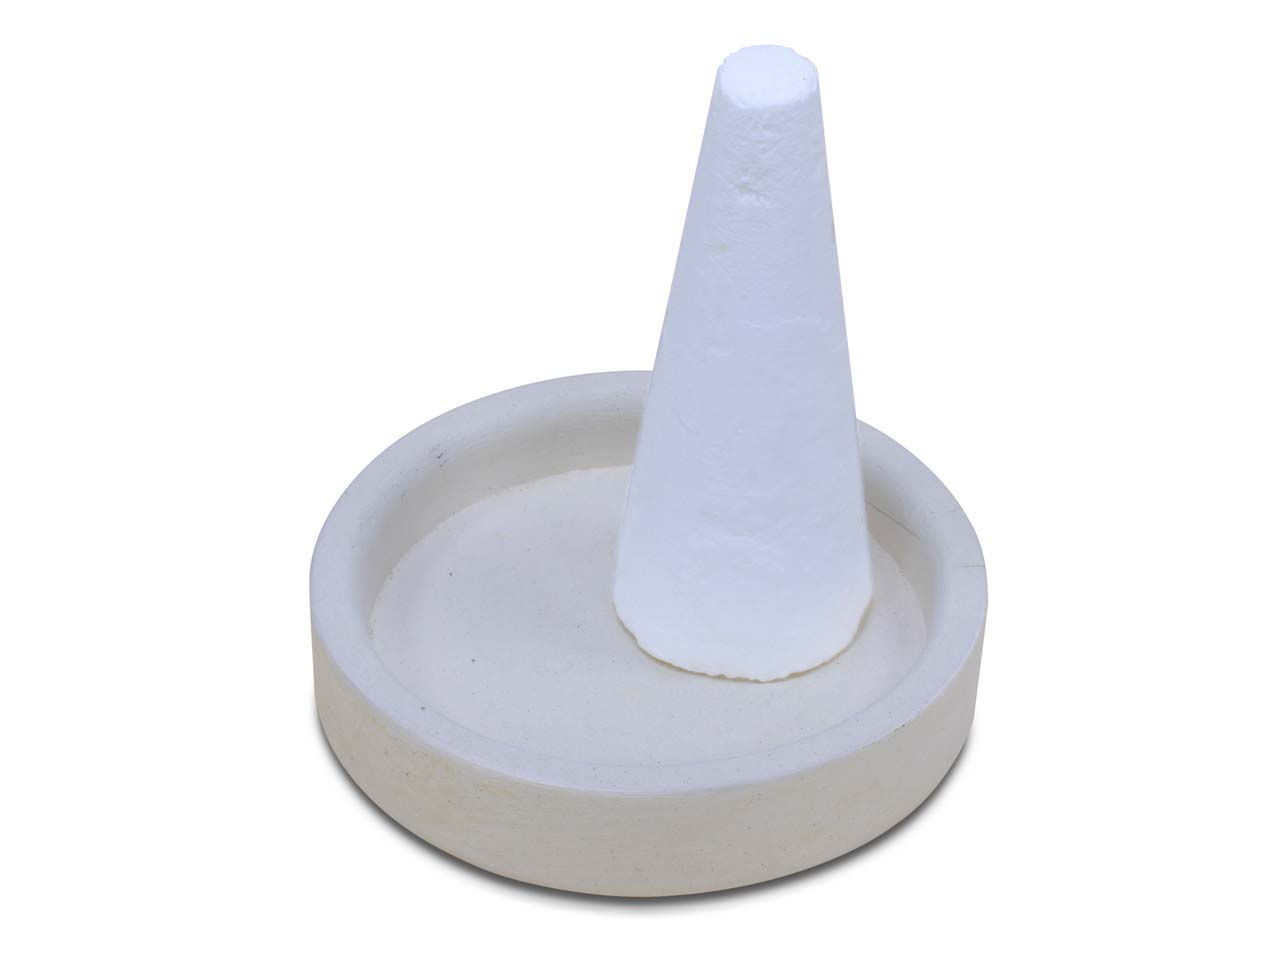 borax cone and dish for jewellery making